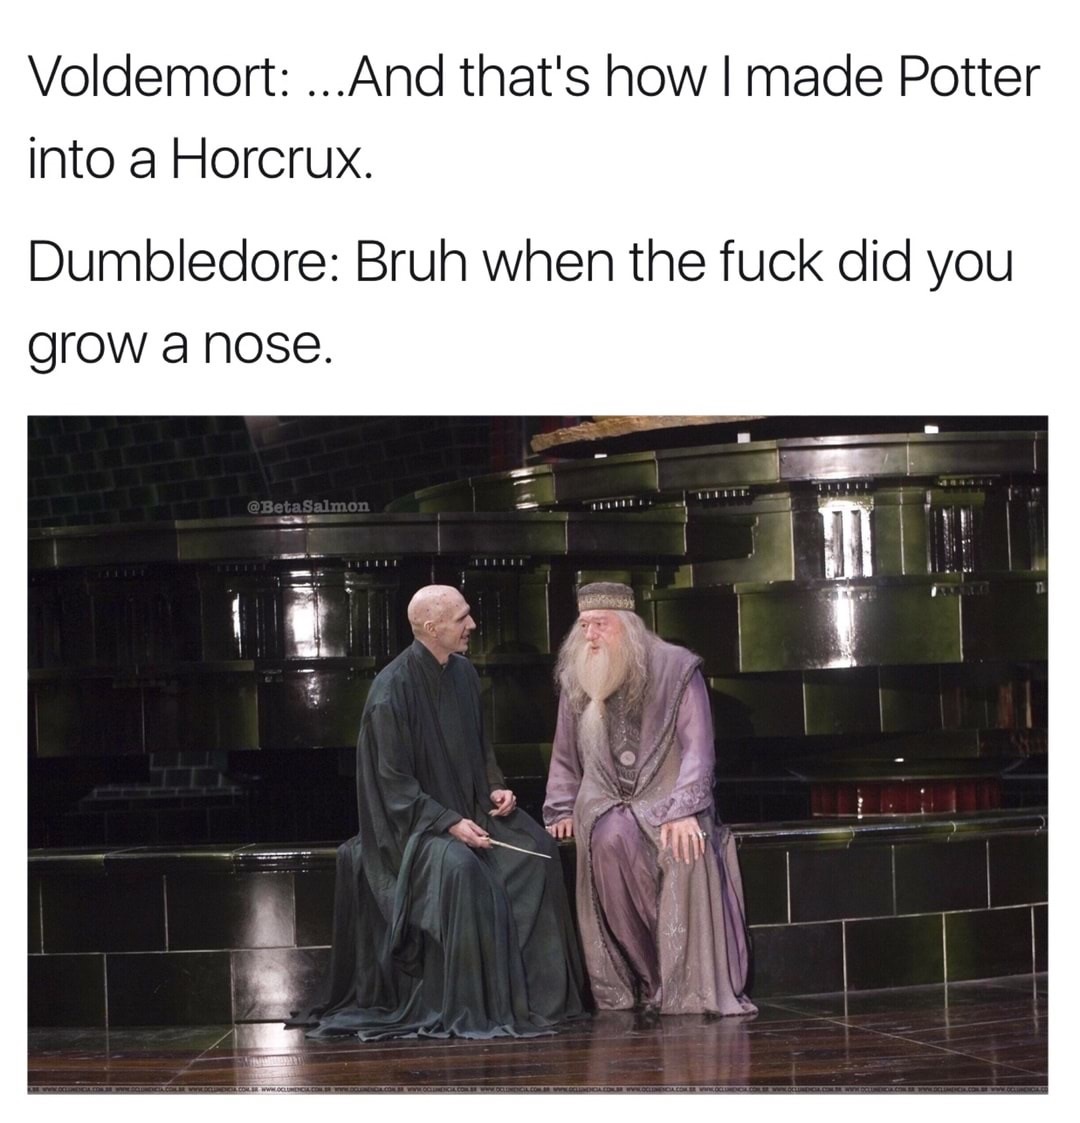 dumbledore voldemort - Voldemort ... And that's how I made Potter into a Horcrux. Dumbledore Bruh when the fuck did you grow a nose. Gol